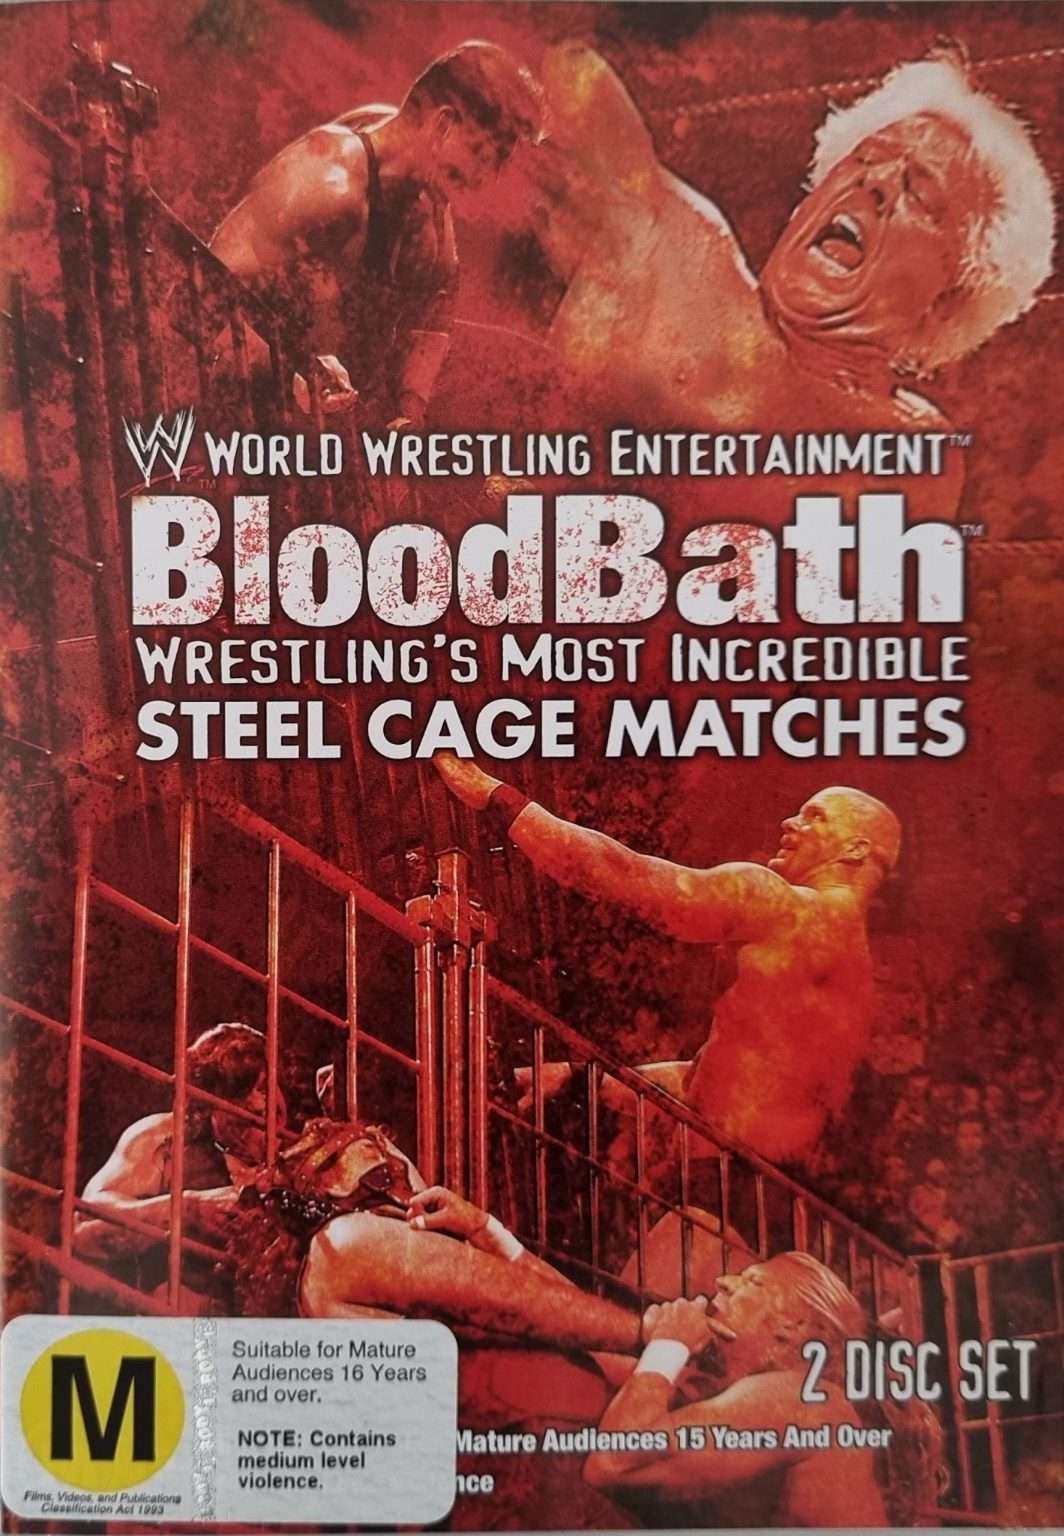 WWE: Bloodbath - Wrestling's Most Incredible Steel Cage Matches 2 Disc